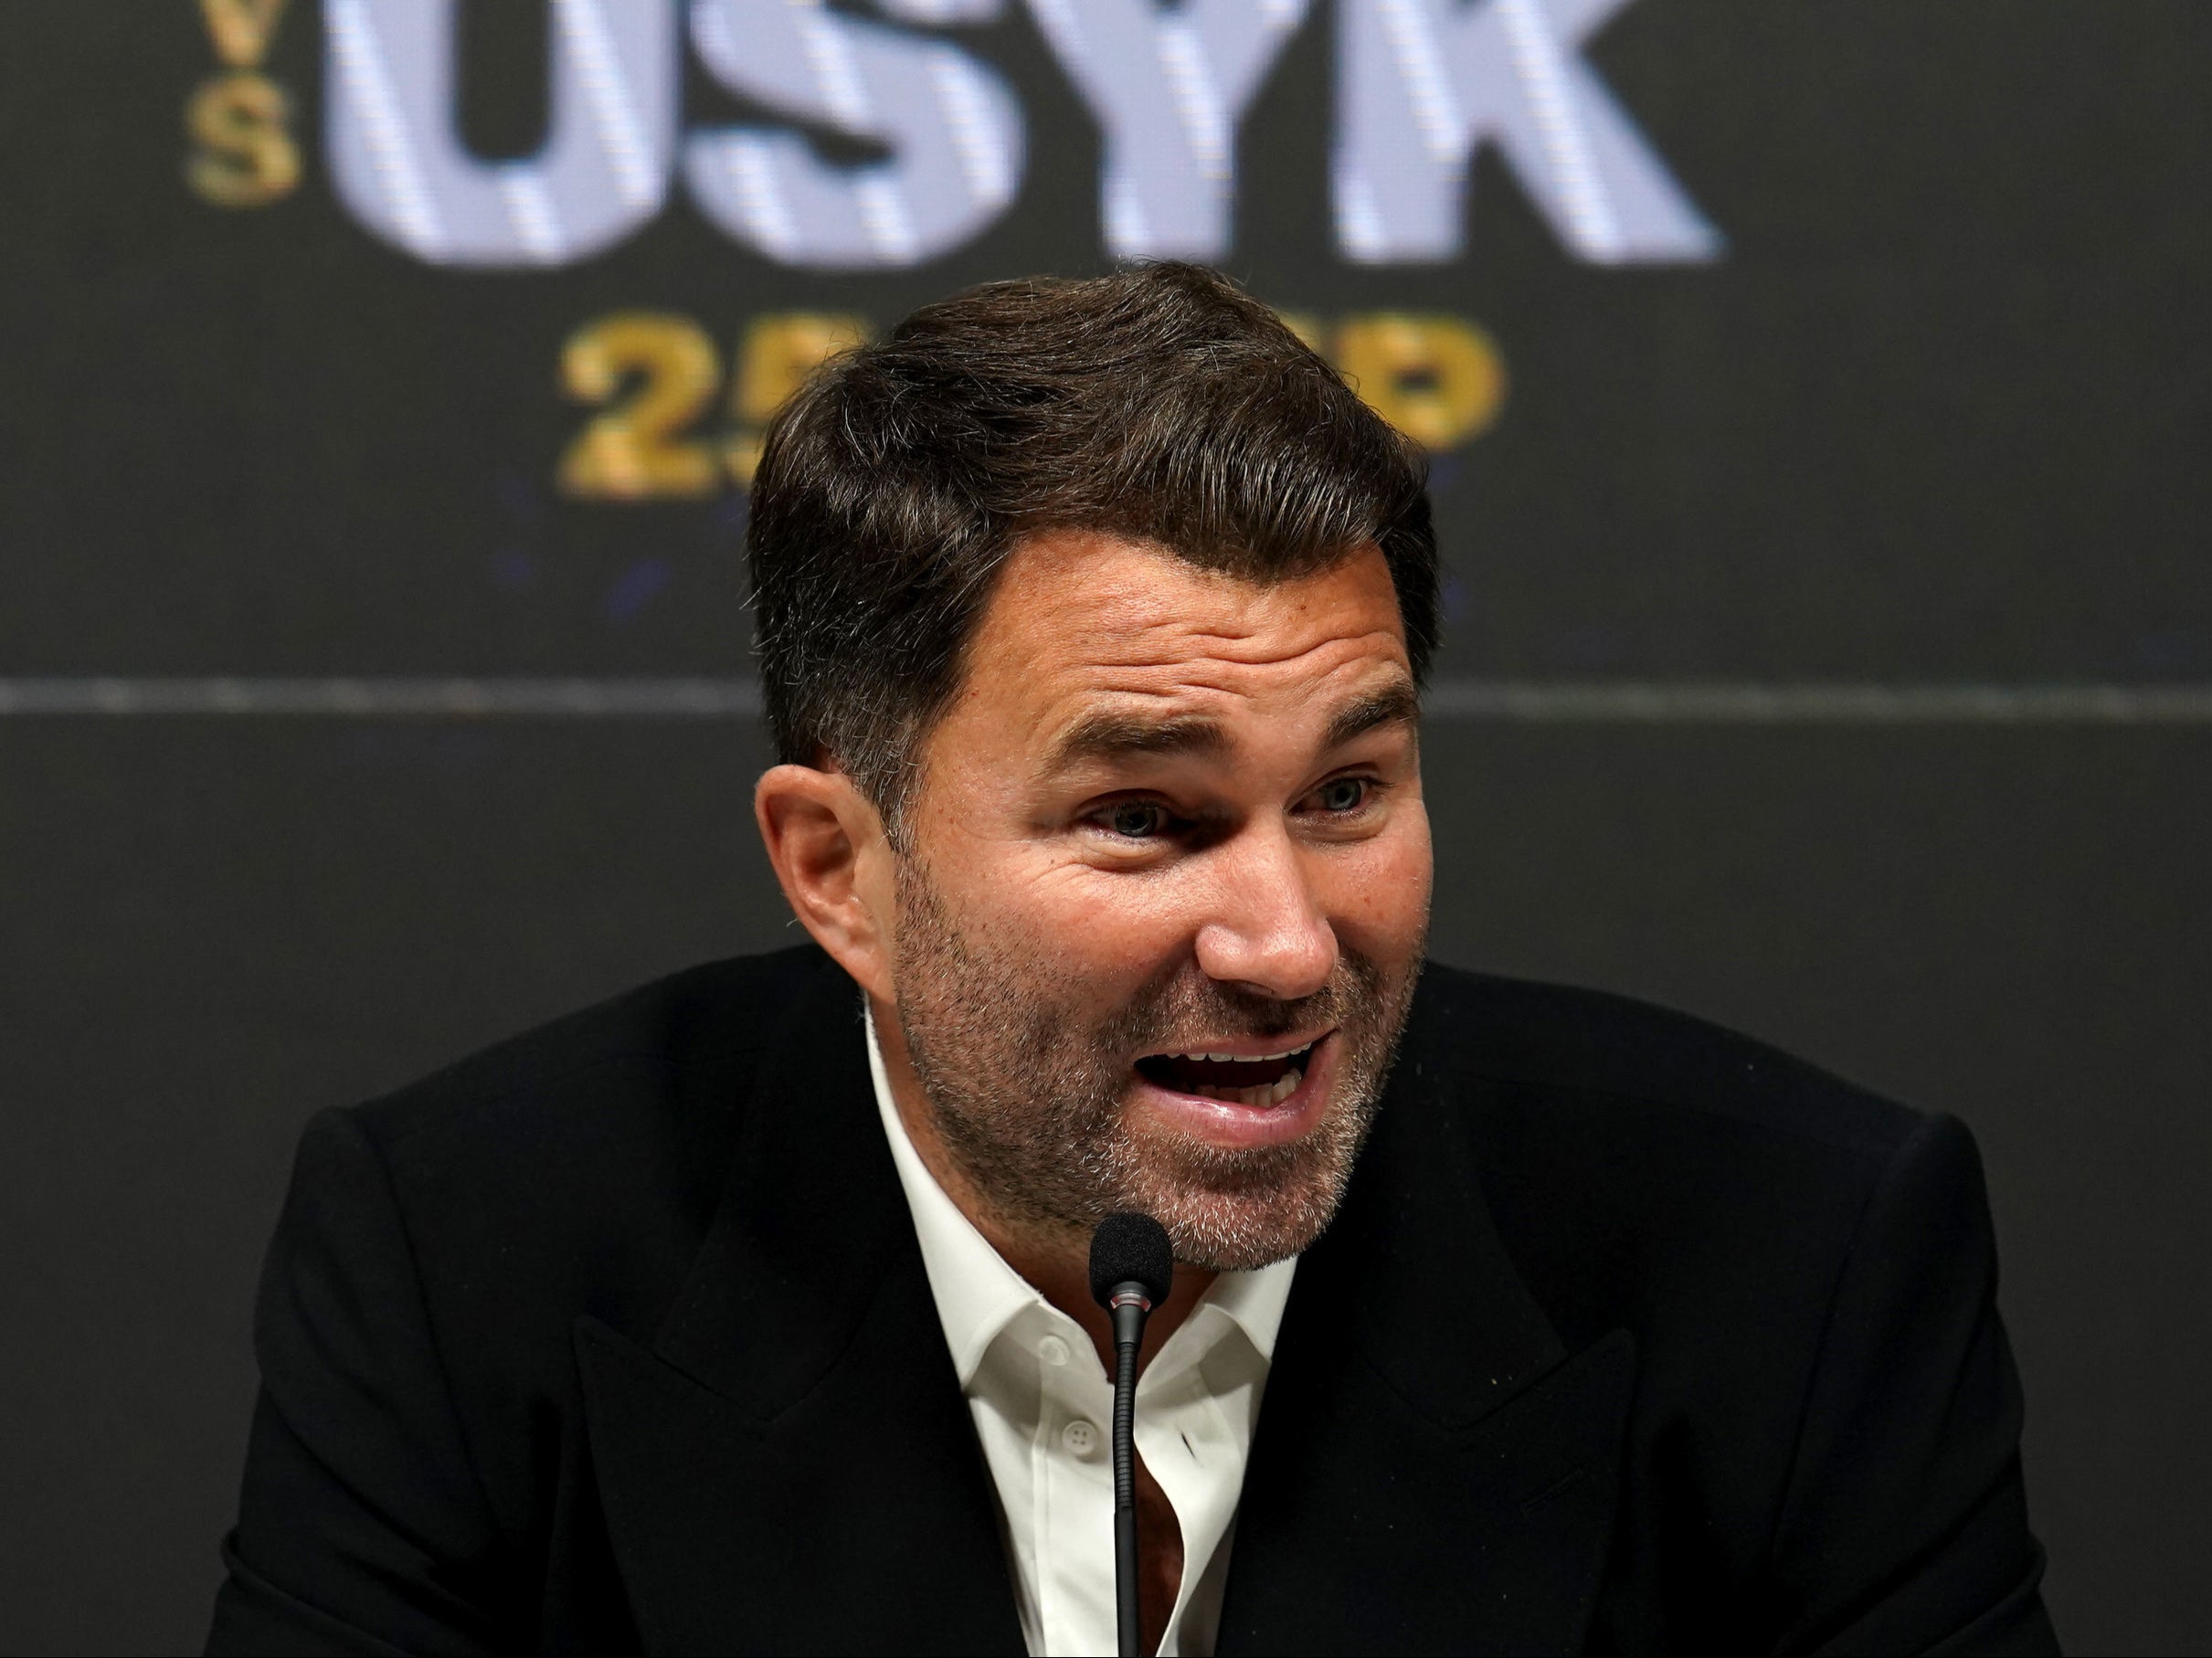 Eddie Hearn was shocked by the proposal